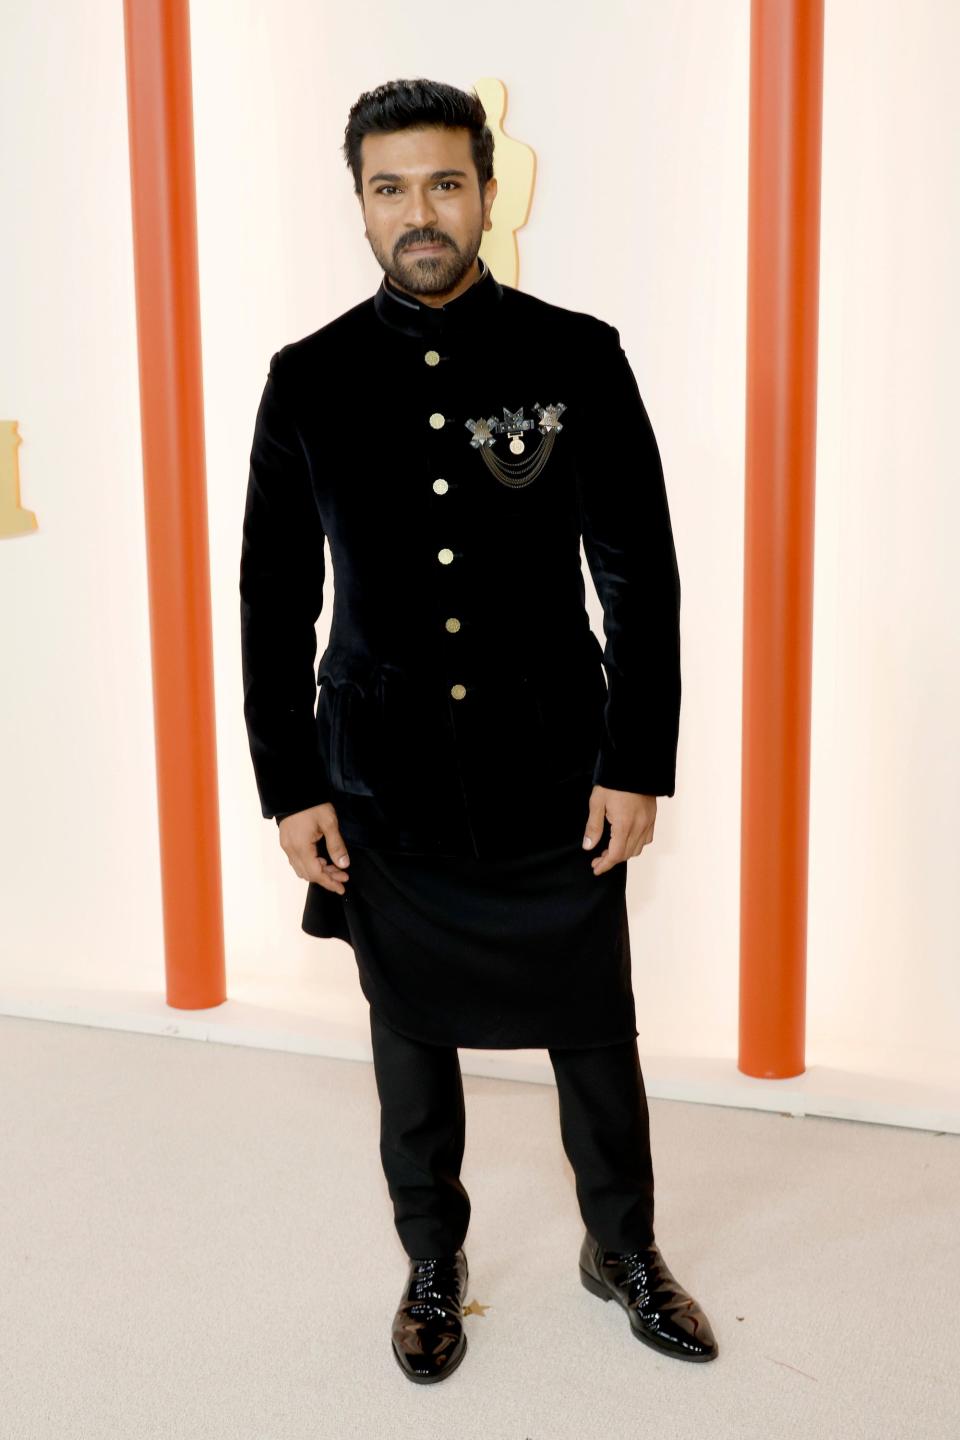 Ram Charan attends the 2023 Academy Awards.